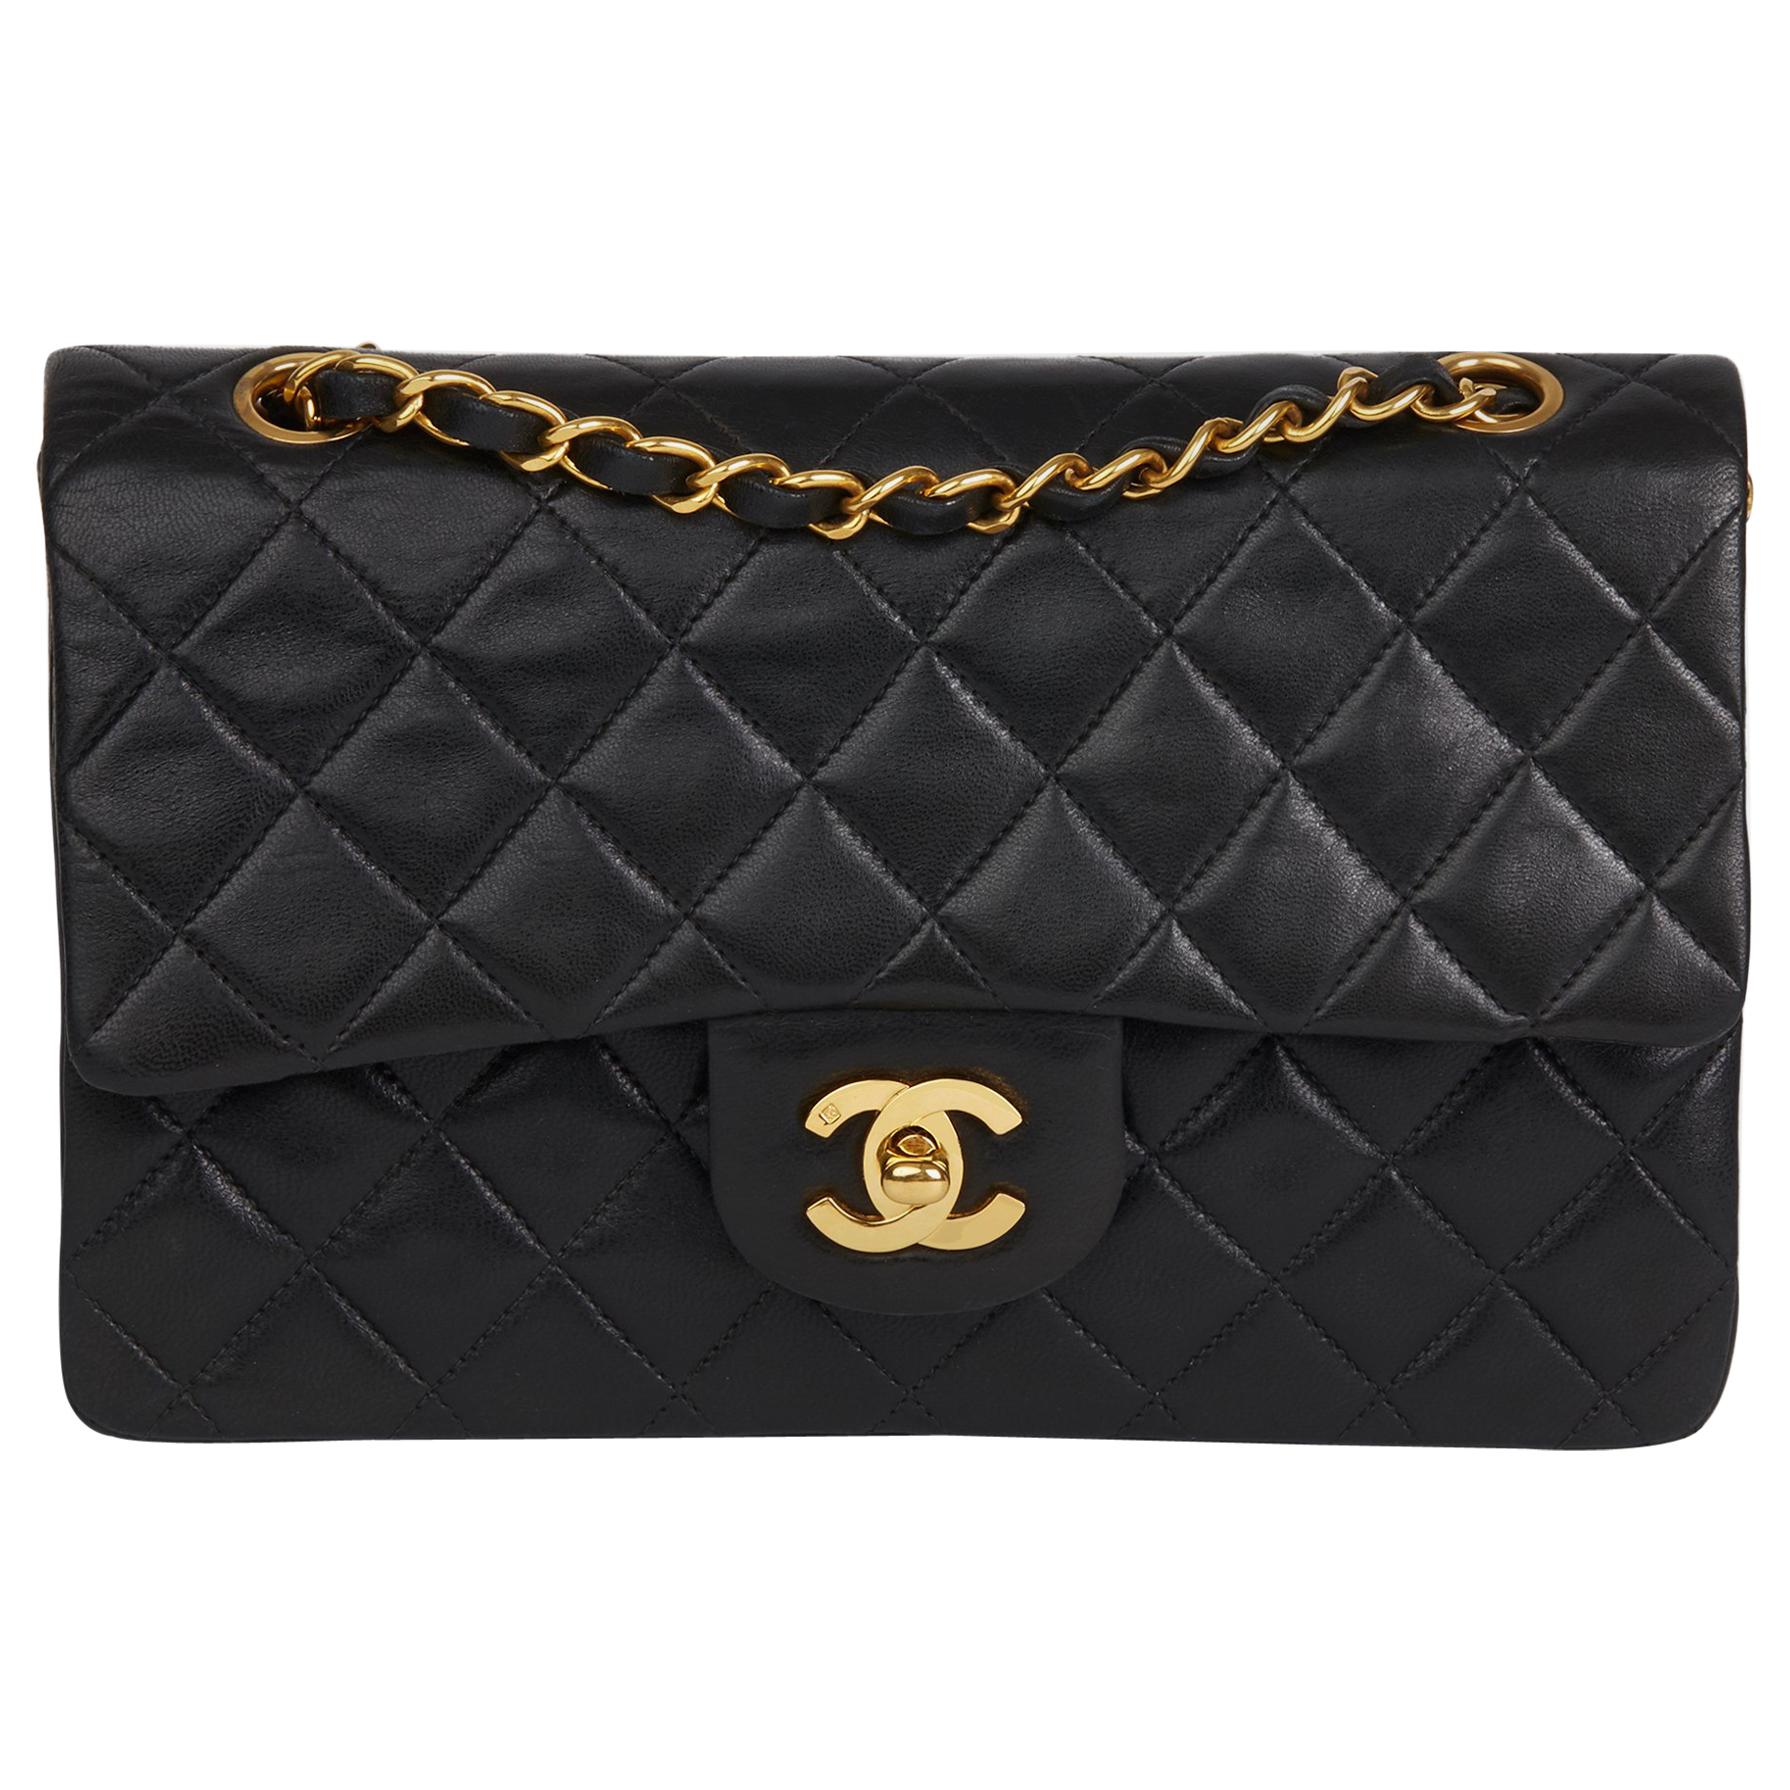 1996 Chanel Black Quilted Lambskin Vintage Small Classic Double Flap Bag